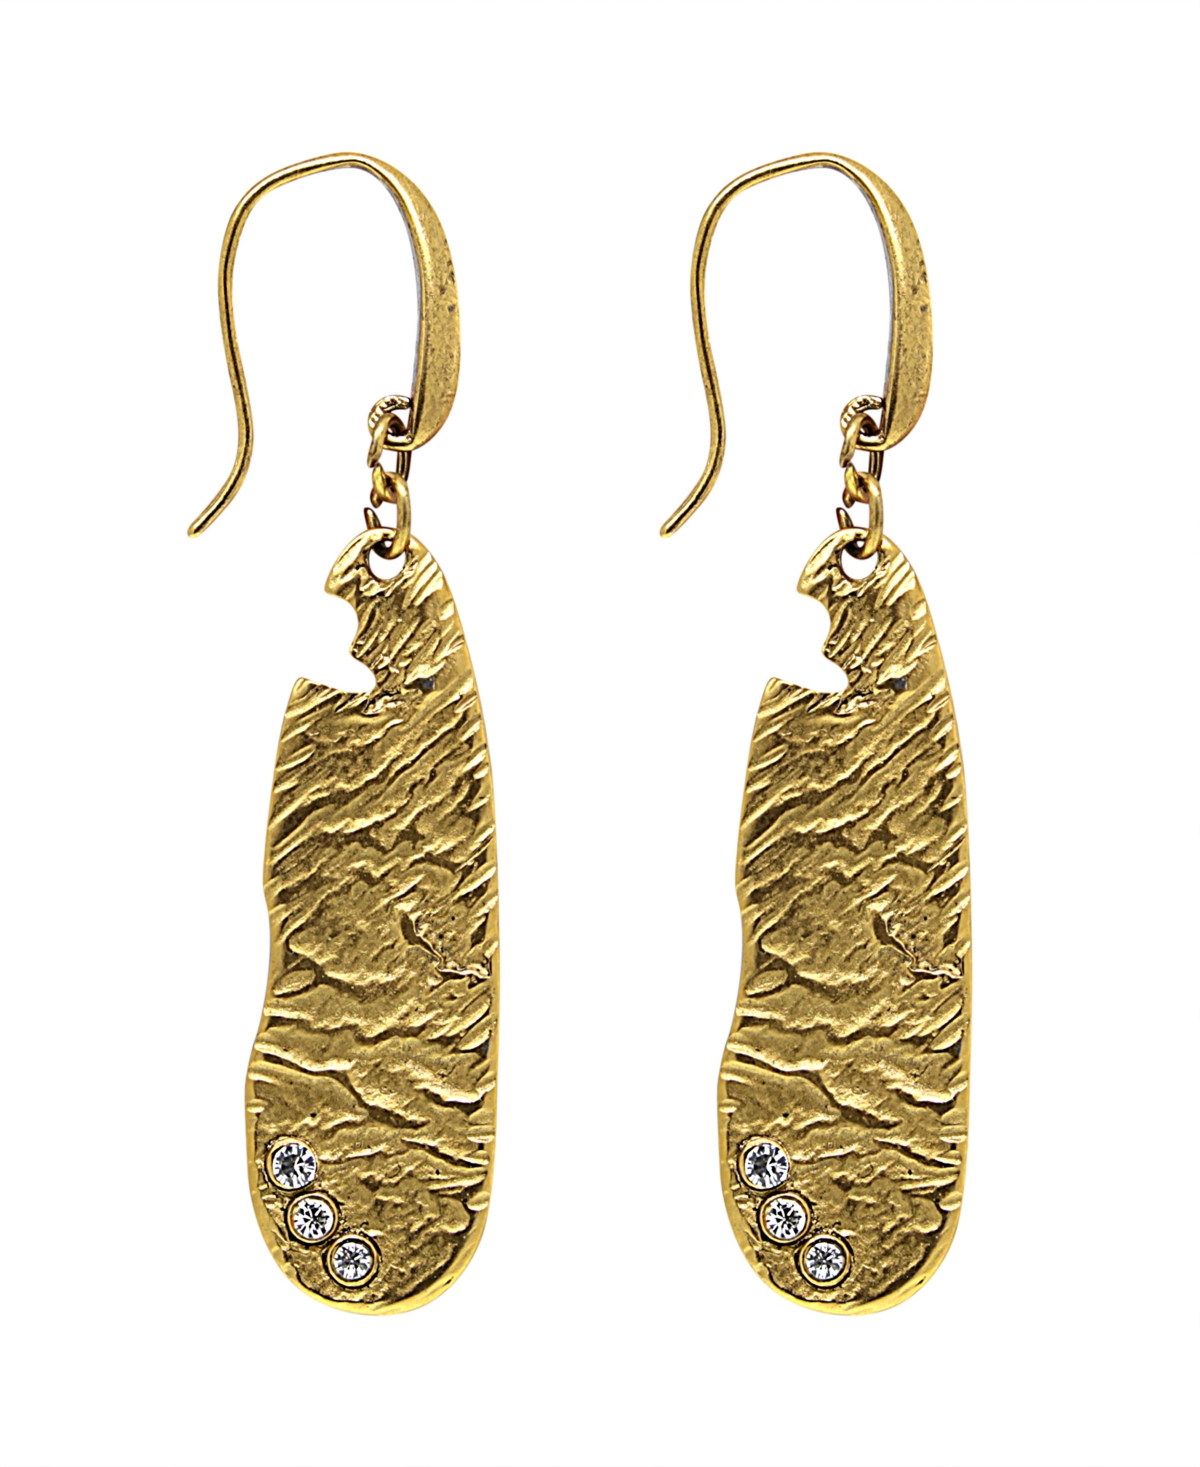 T.r.u. by 1928 14 K Gold Dipped Sculptured Drop Earring Embellished with Crystals - Gold